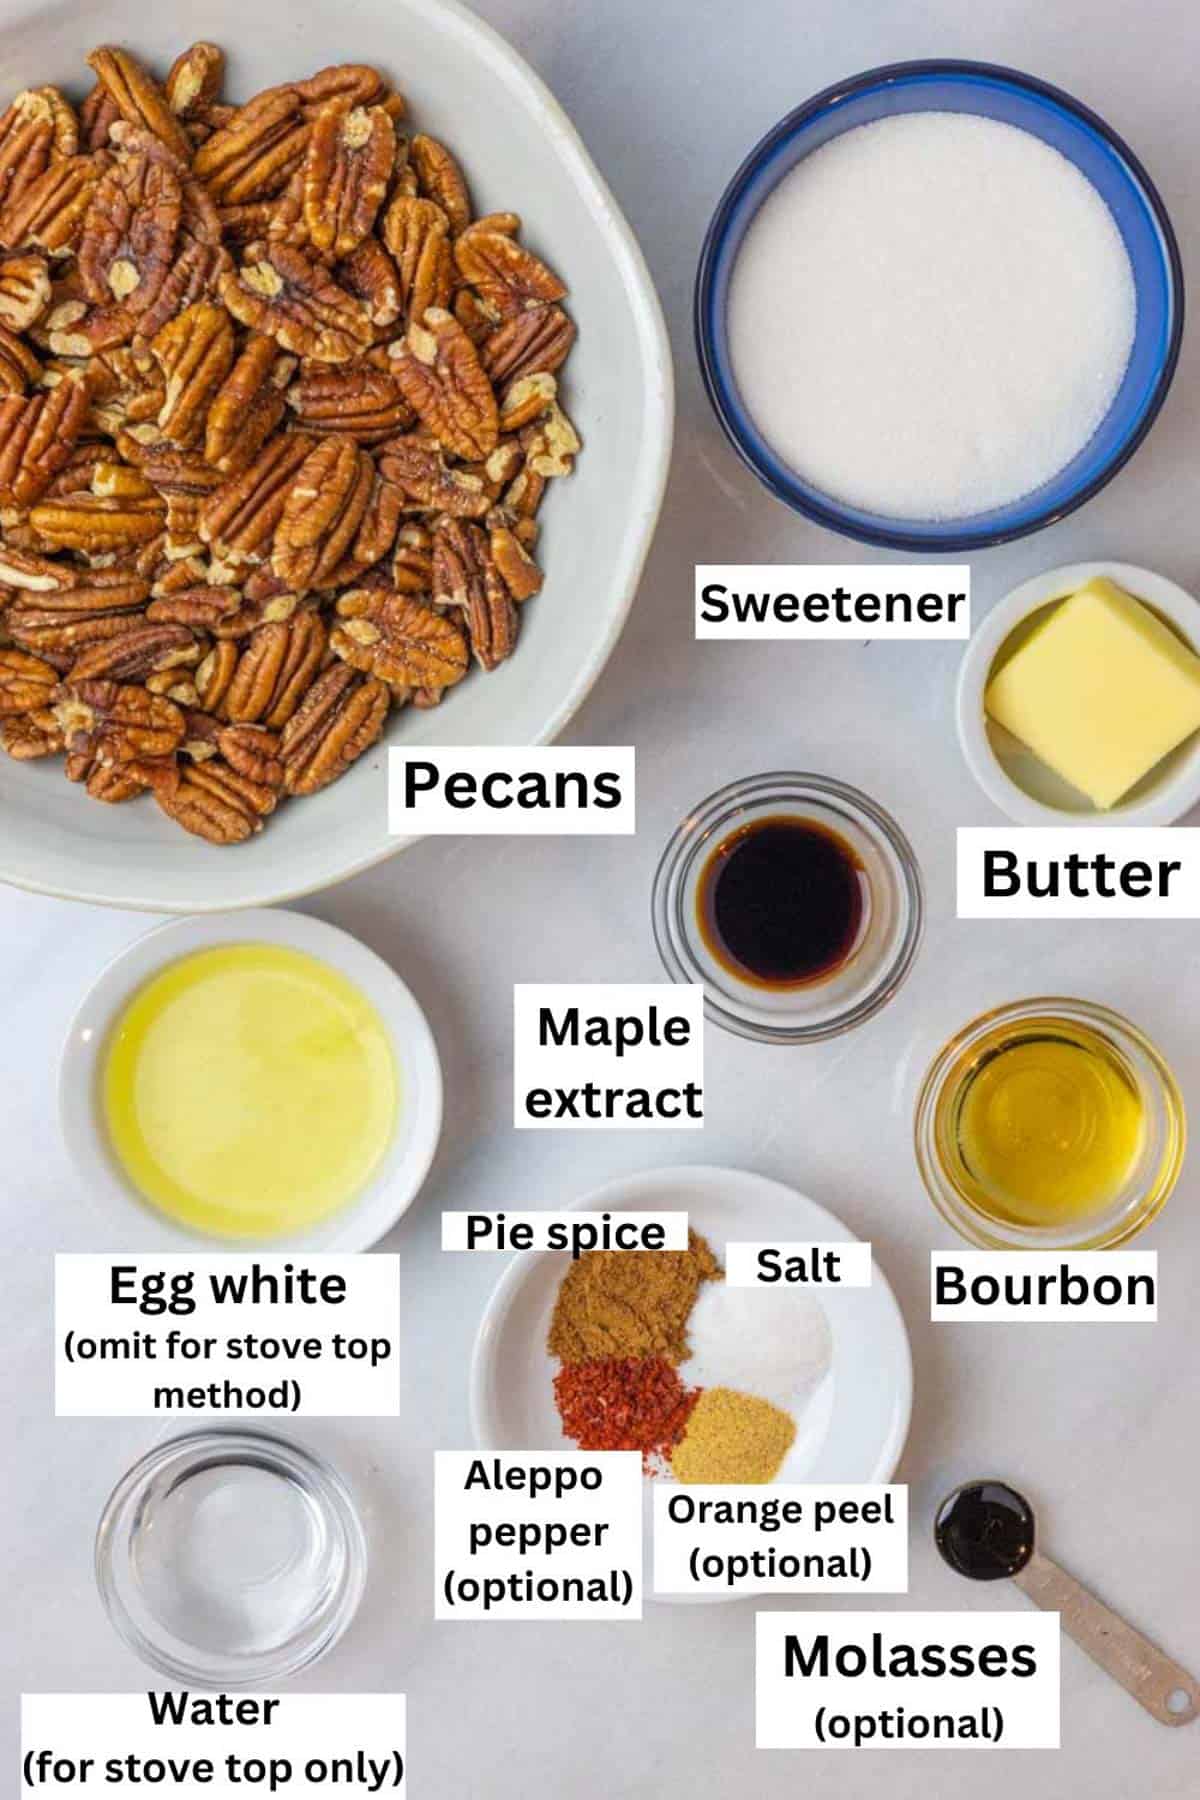 Labeled ingredients for multiple methods of making candied pecans.